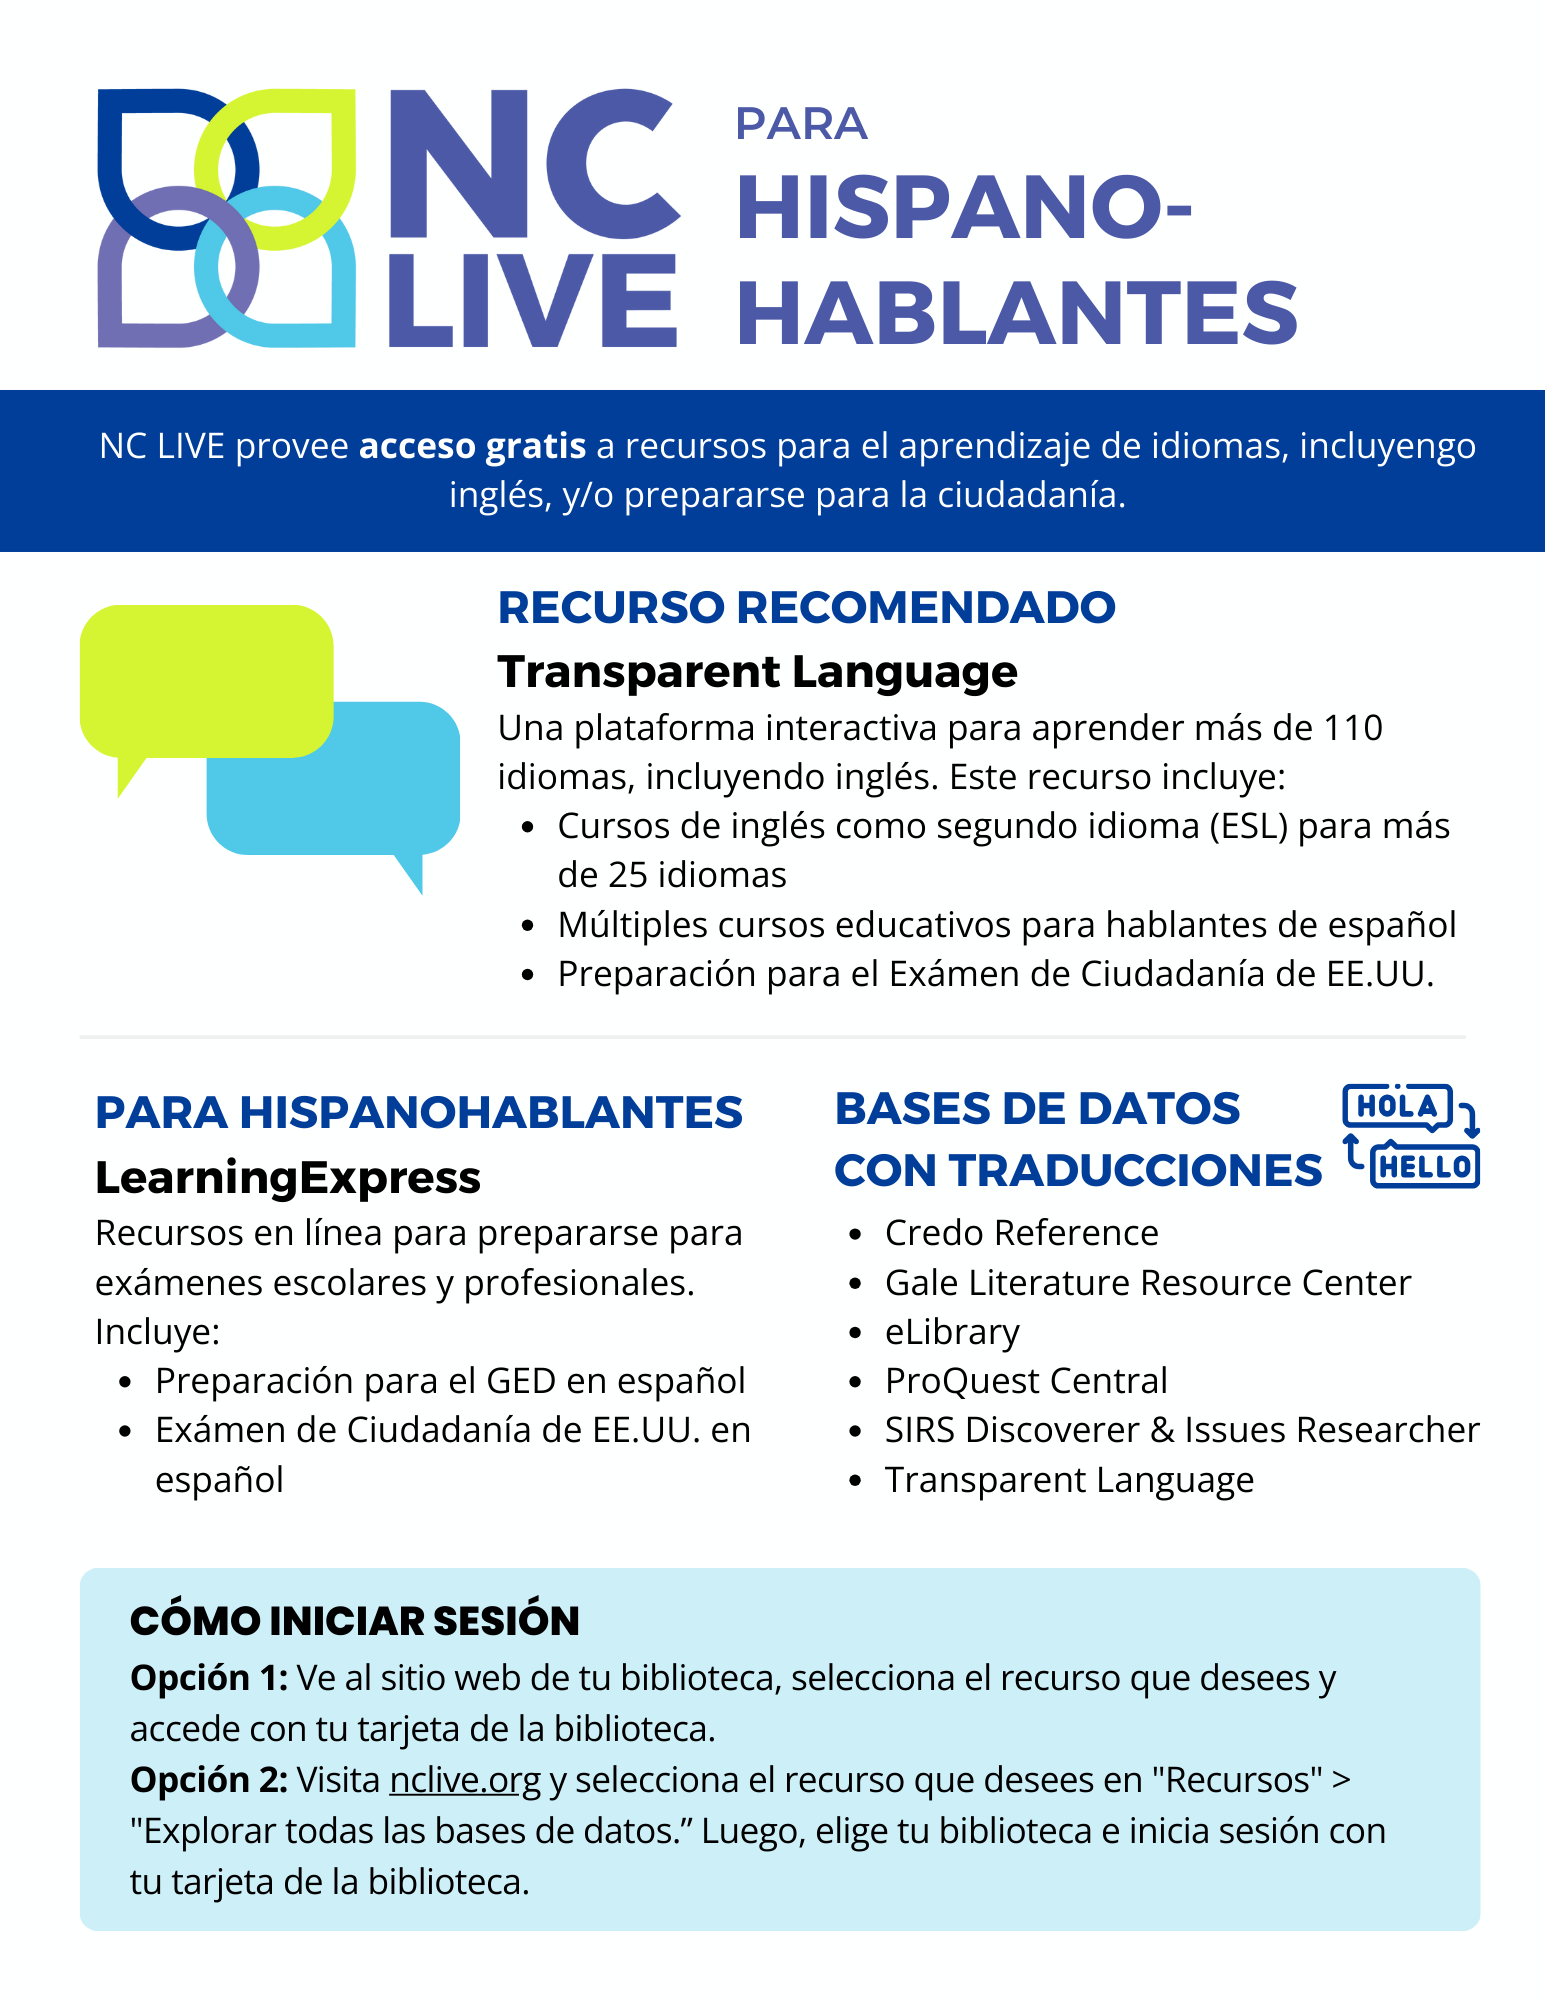 A flyer with two speech bubbles and information about resources in Spanish.